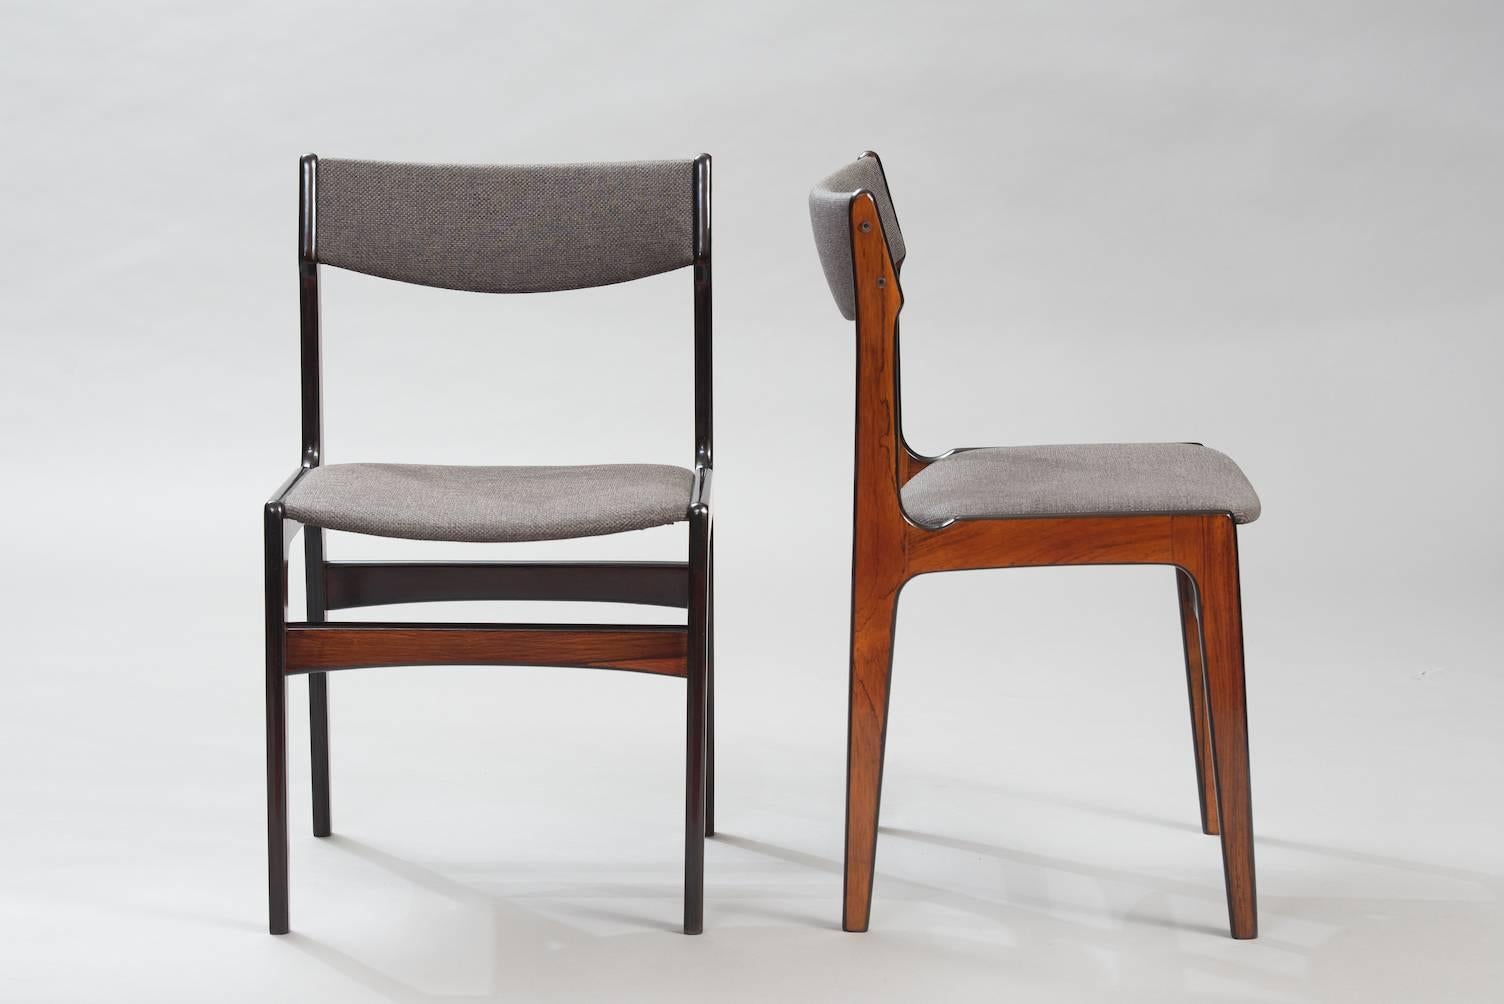 Set of rosewood dining chairs re-upholstered in grey fabric.
Eight units available.